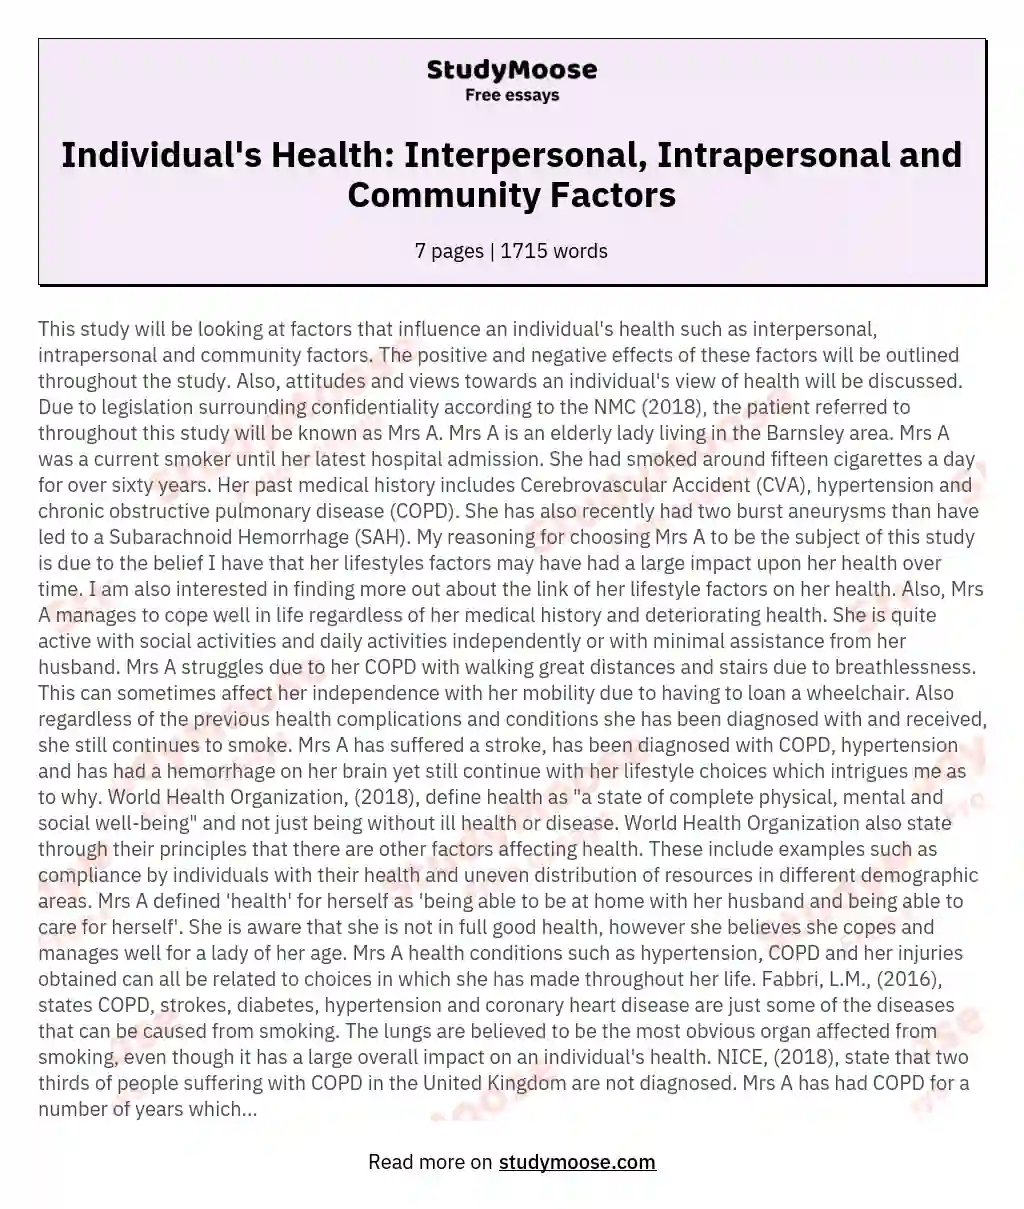 Individual's Health: Interpersonal, Intrapersonal and Community Factors essay